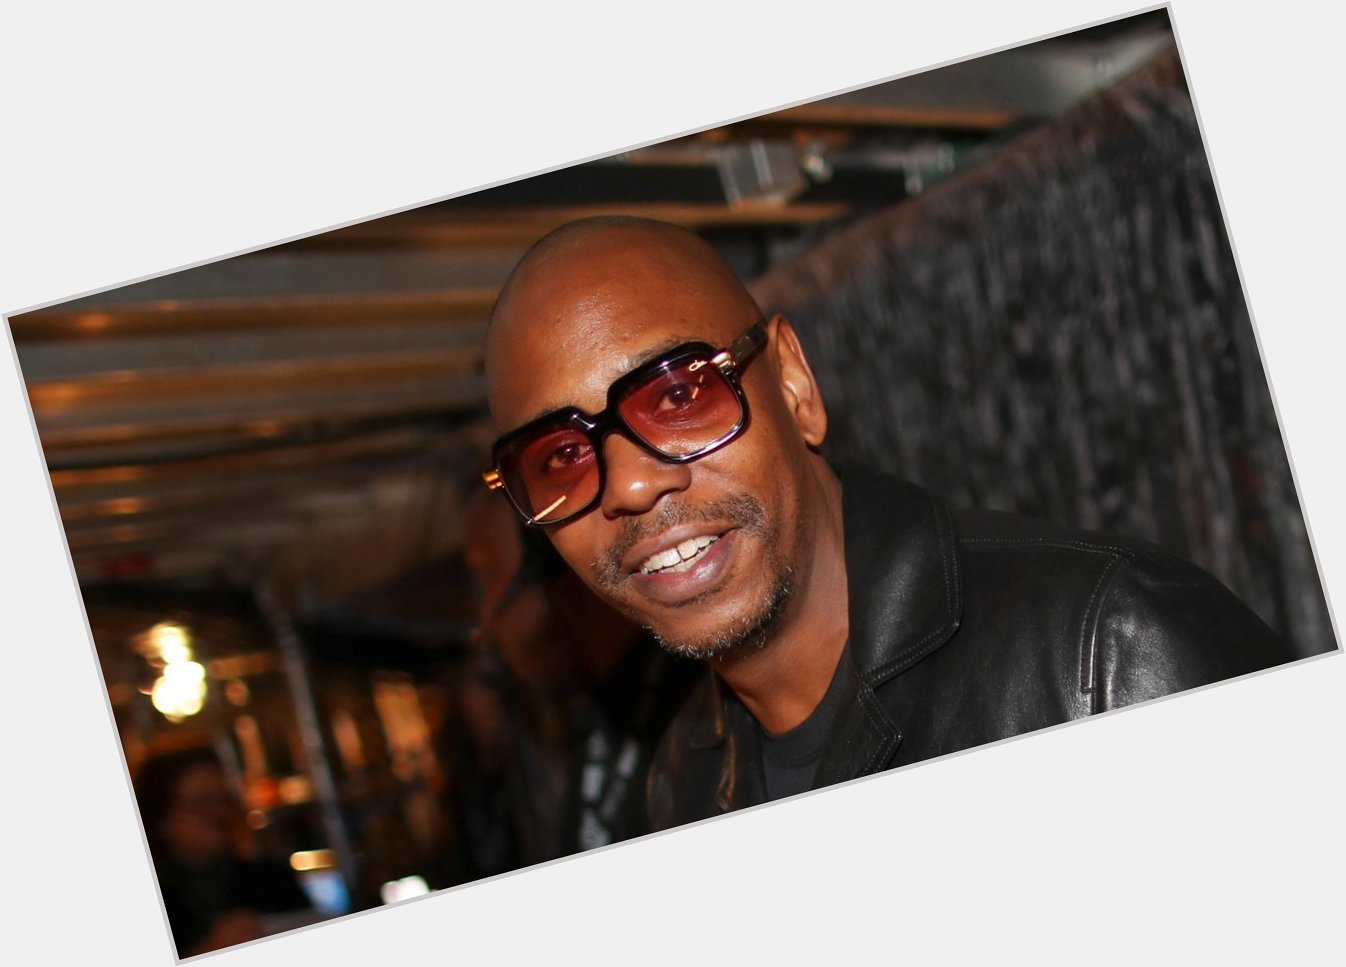 Wishing a Happy 47th Birthday to DC s very own legendary comedian Dave Chappelle  . 